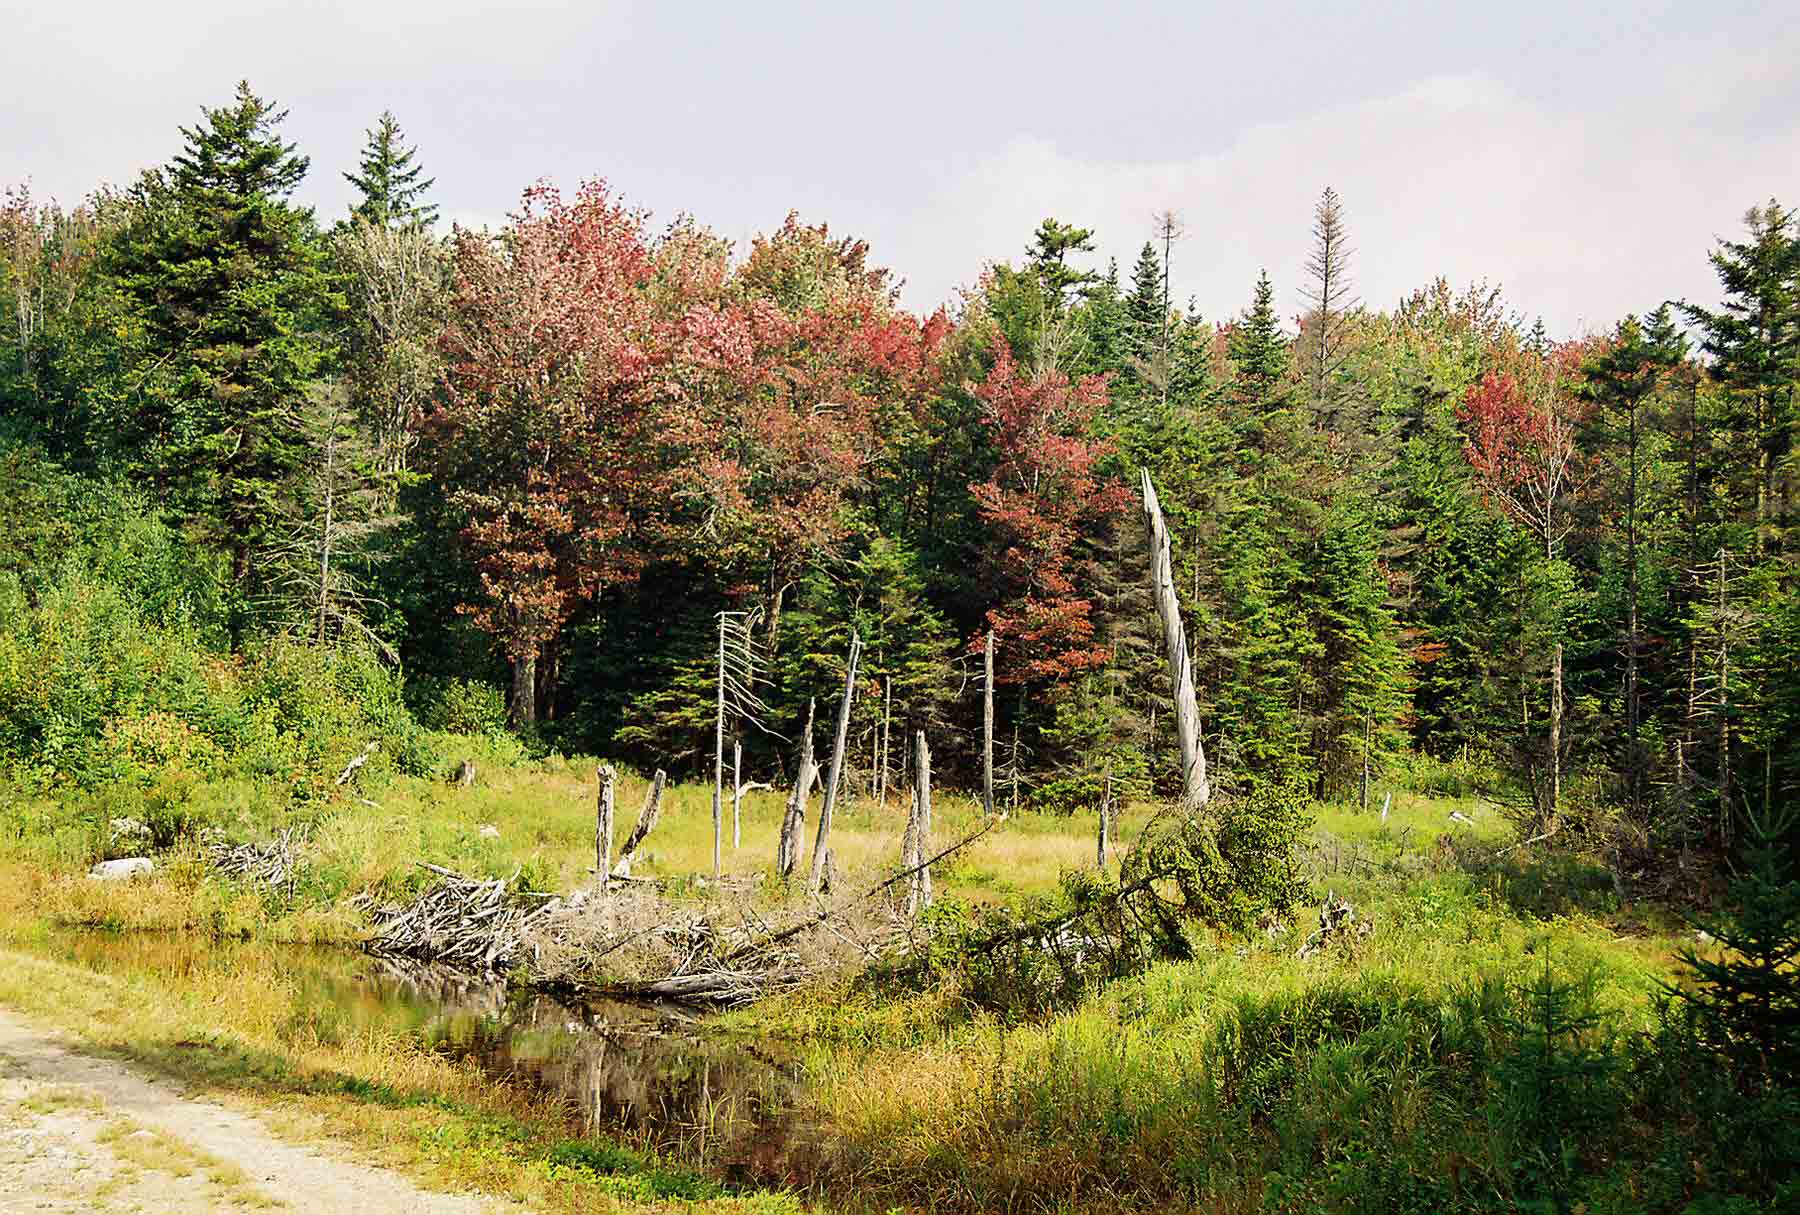 View from trailhead for Stratton Pond Trail. This blue-blazed trail, which once was the route of the AT/LT, provides access to Stratton Pond without going over Stratton Mt. The junction of the Stratton Pond Trail and the AT is at Mile 10.6. Picture was taken in early fall. Courtesy dlcul@conncoll.edu